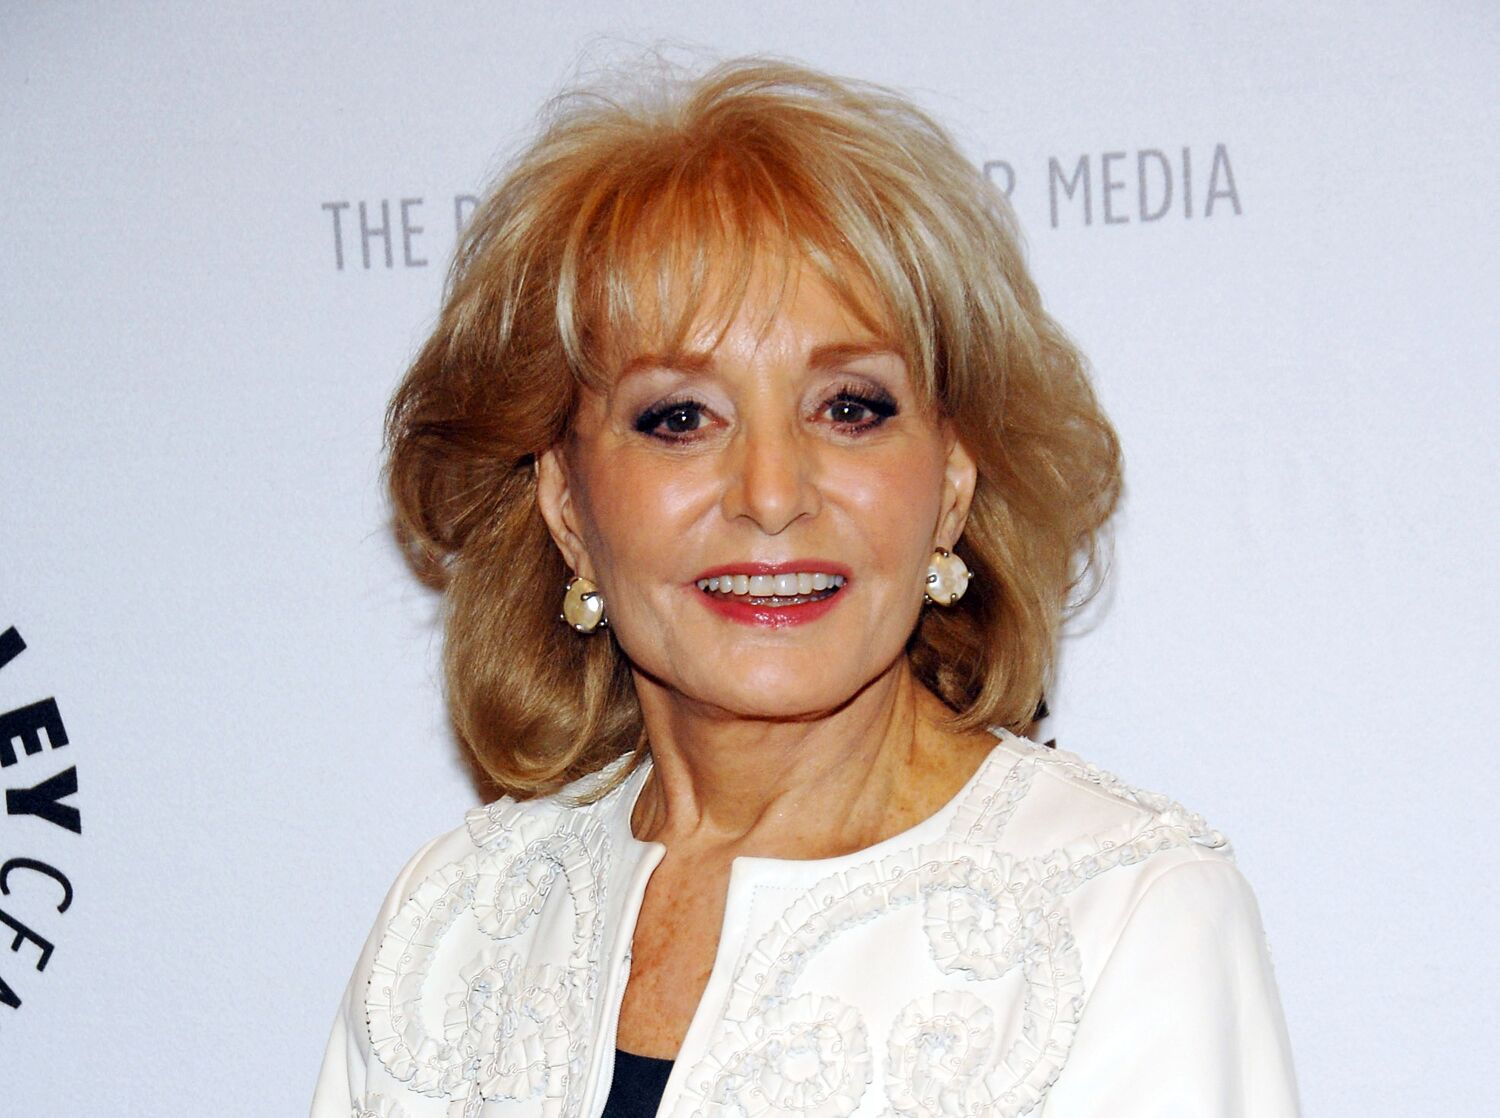 Barbara Walters' 12 most influential TV interviews